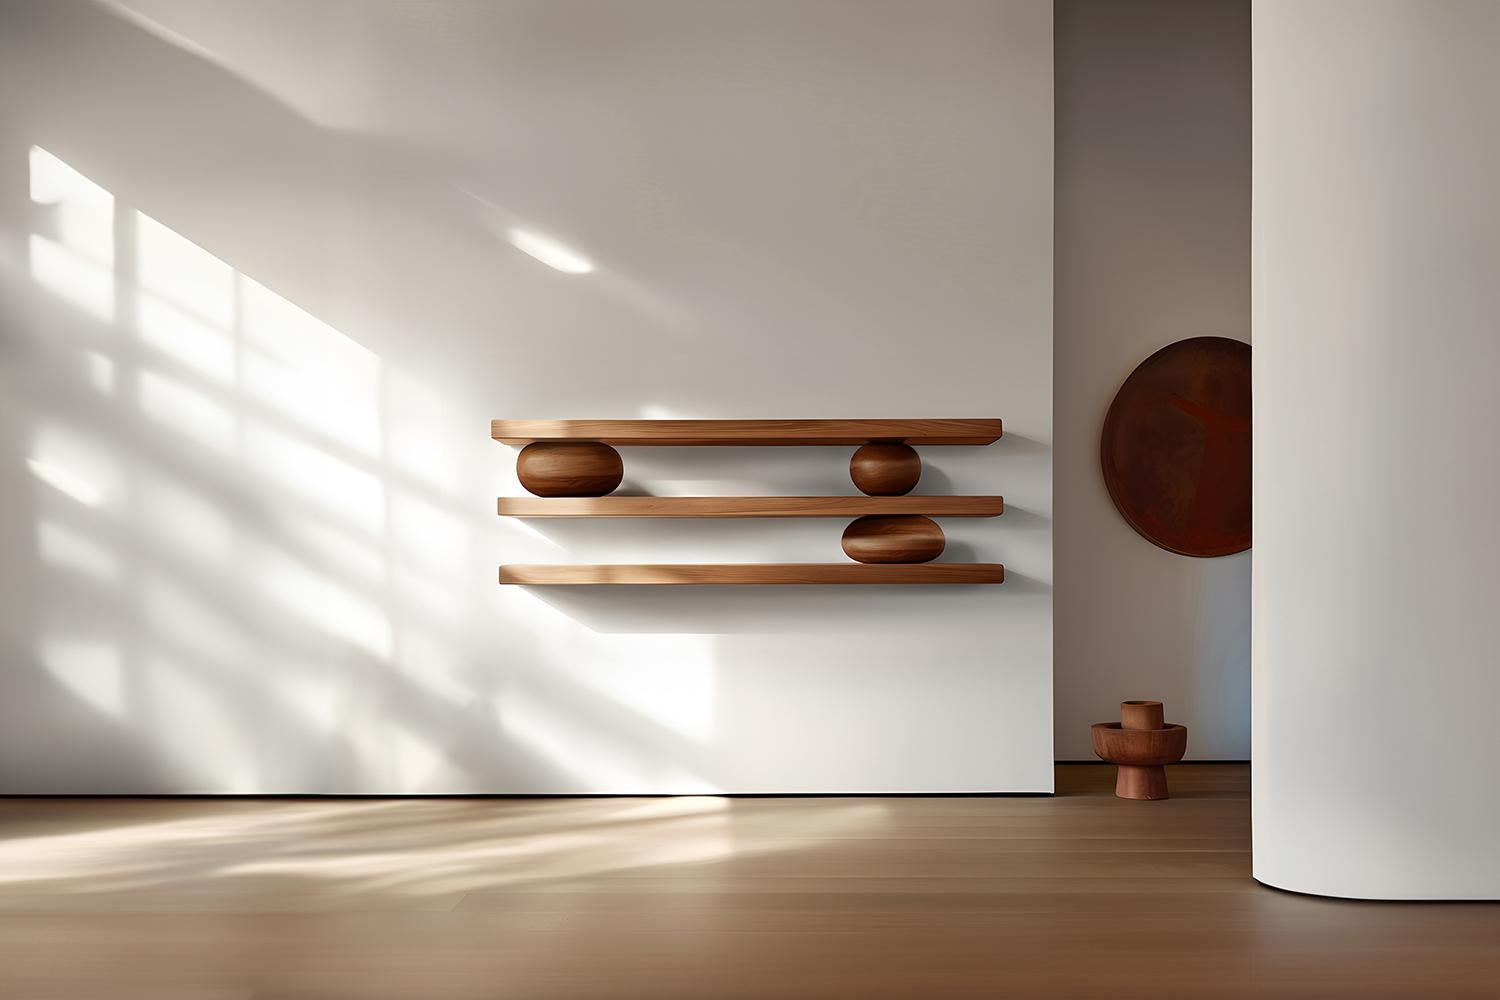 Set of Three Floating Shelves with Three Sculptural Wooden Pebble Accents, Sereno by Joel Escalona

—

What happens when the practical becomes art?
What happens when ornamentation gains significance?

Those were the questions Joel Escalona